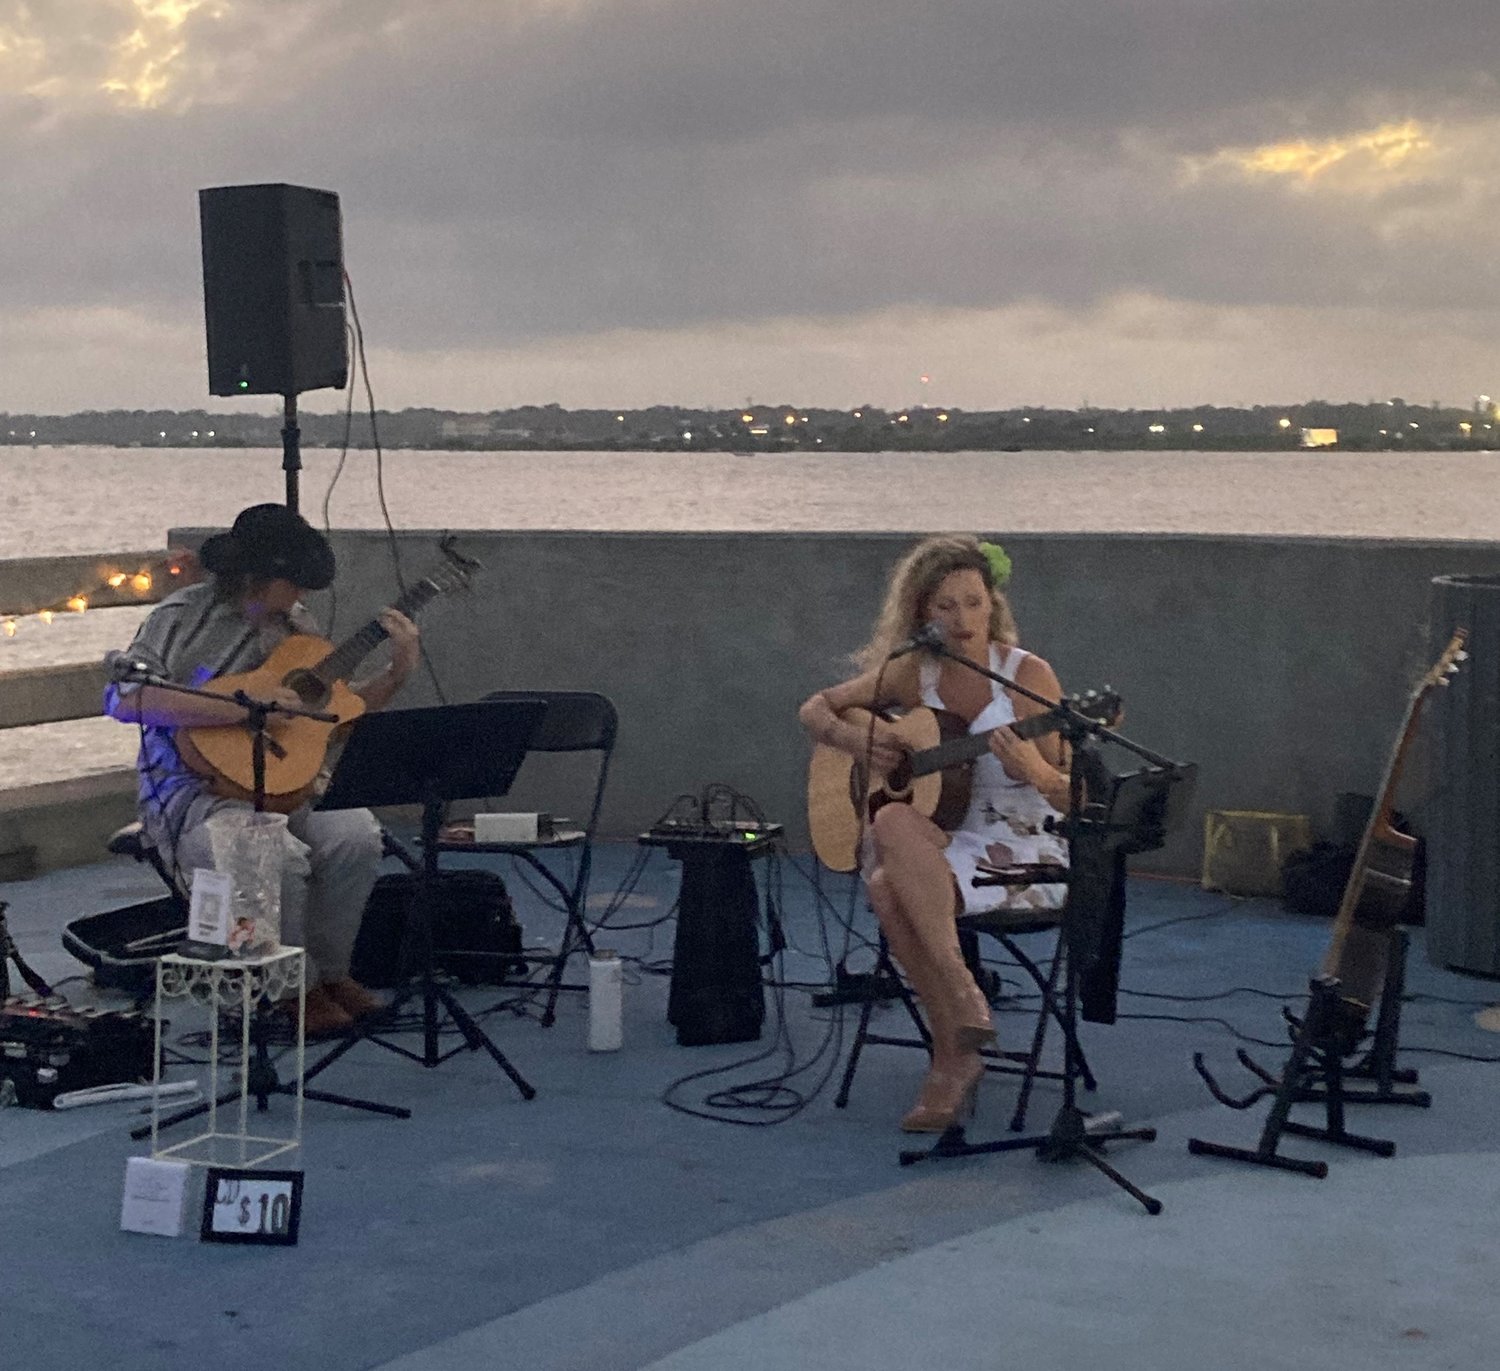 The Yael & Gabriel Duo performed on the pier.